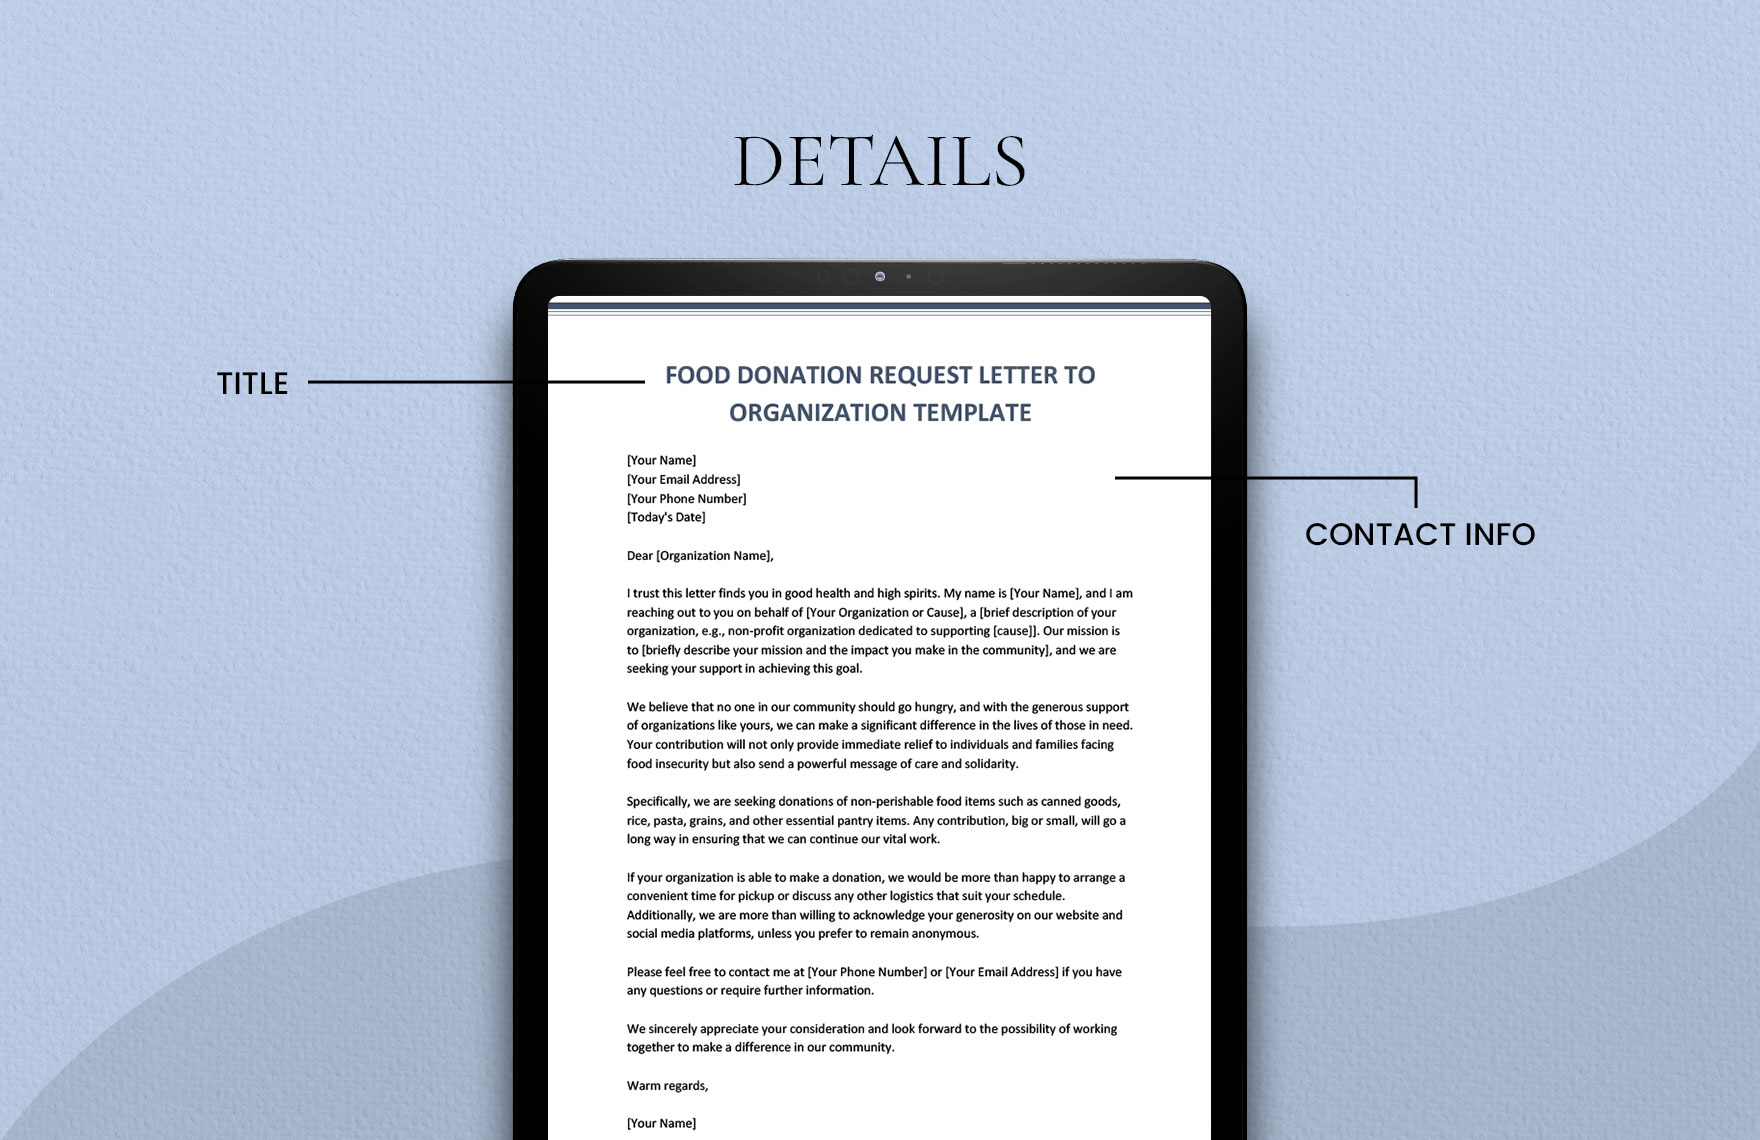 Food Donation Request Letter to Organization Template